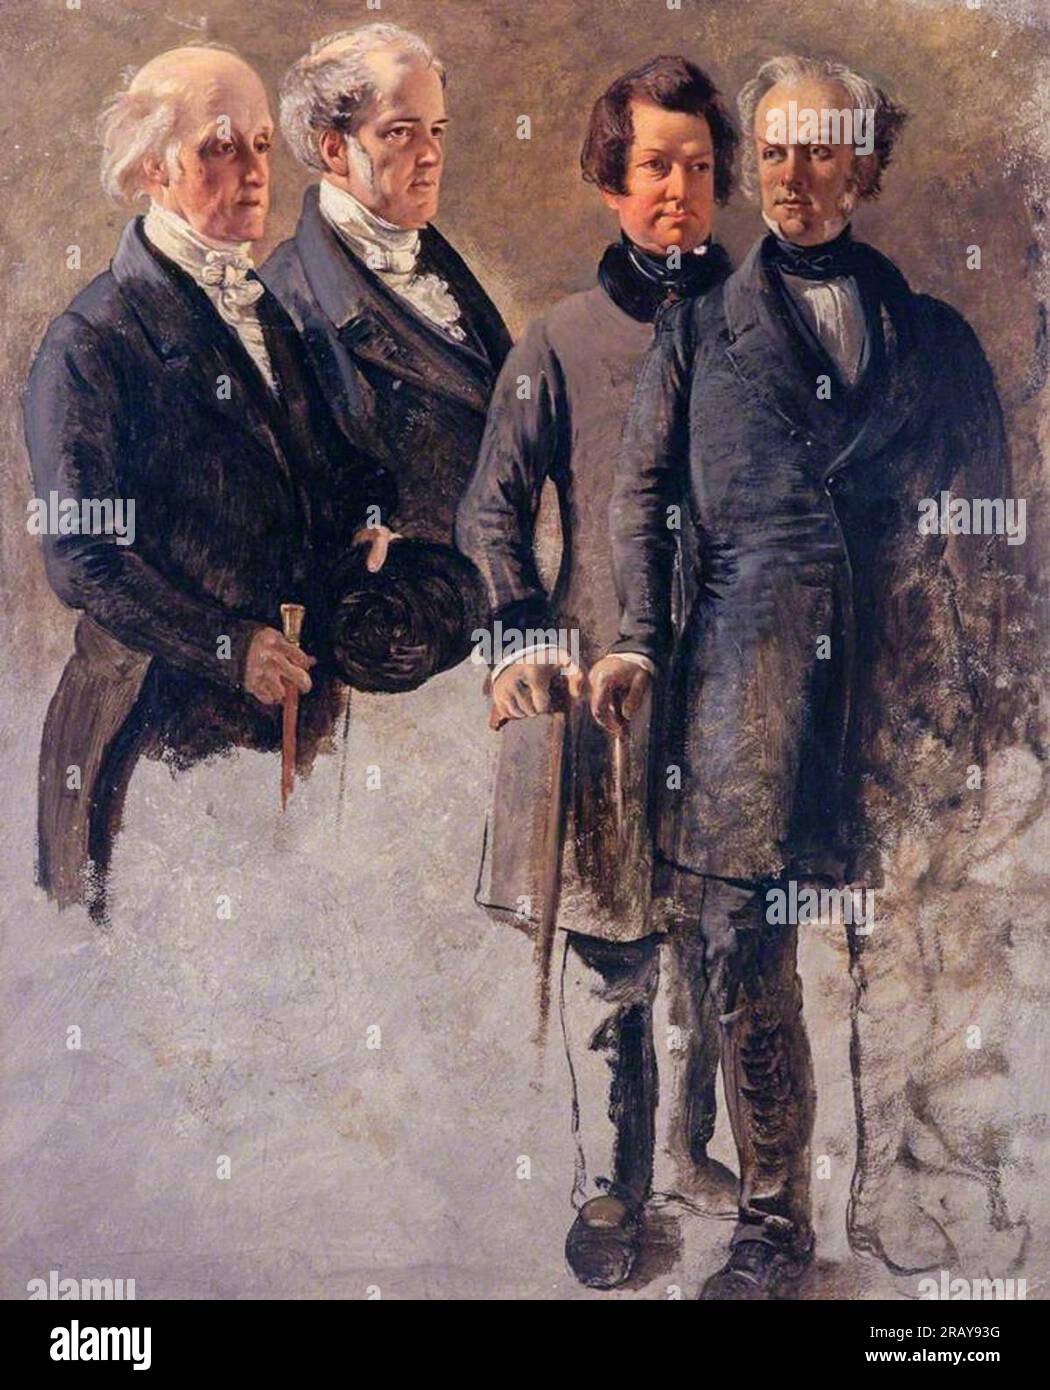 The Marquess of Breadalbane with Lord Cockburn, the Marquess of Dalhousie and Lord Rutherfurd 1850 by George Harvey Stock Photo